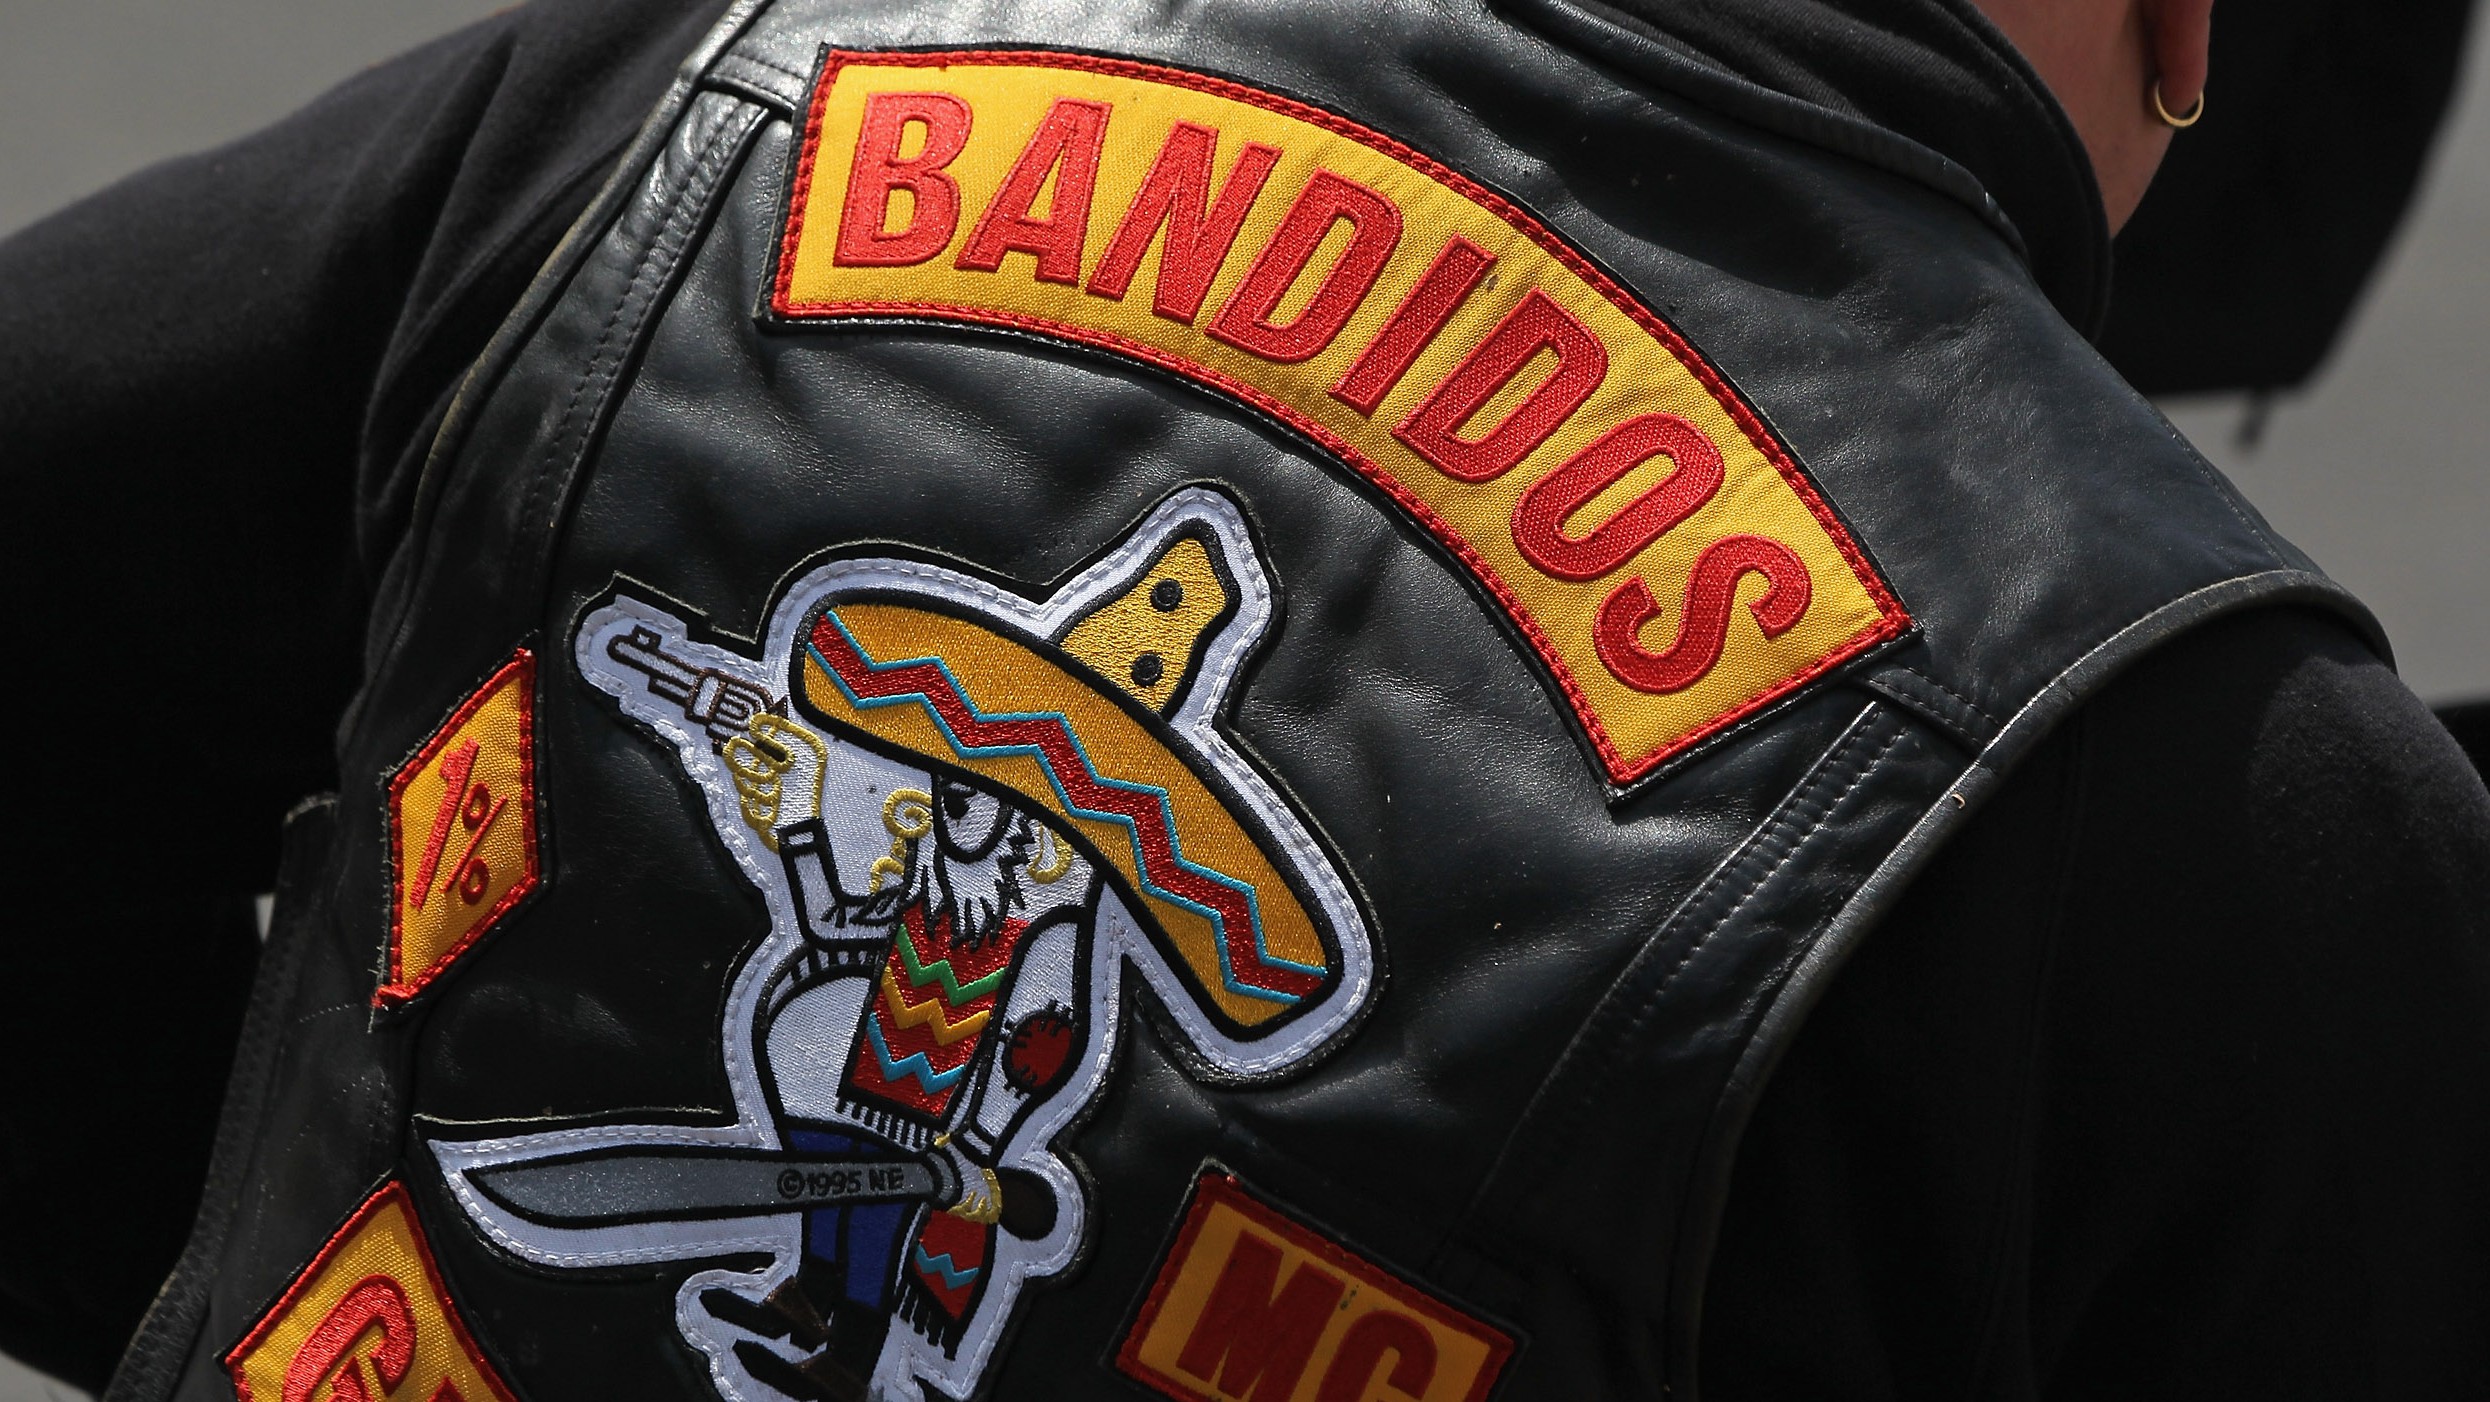  Bandidos Motorcycle Club 5 Fast Facts You Need To Know Heavy